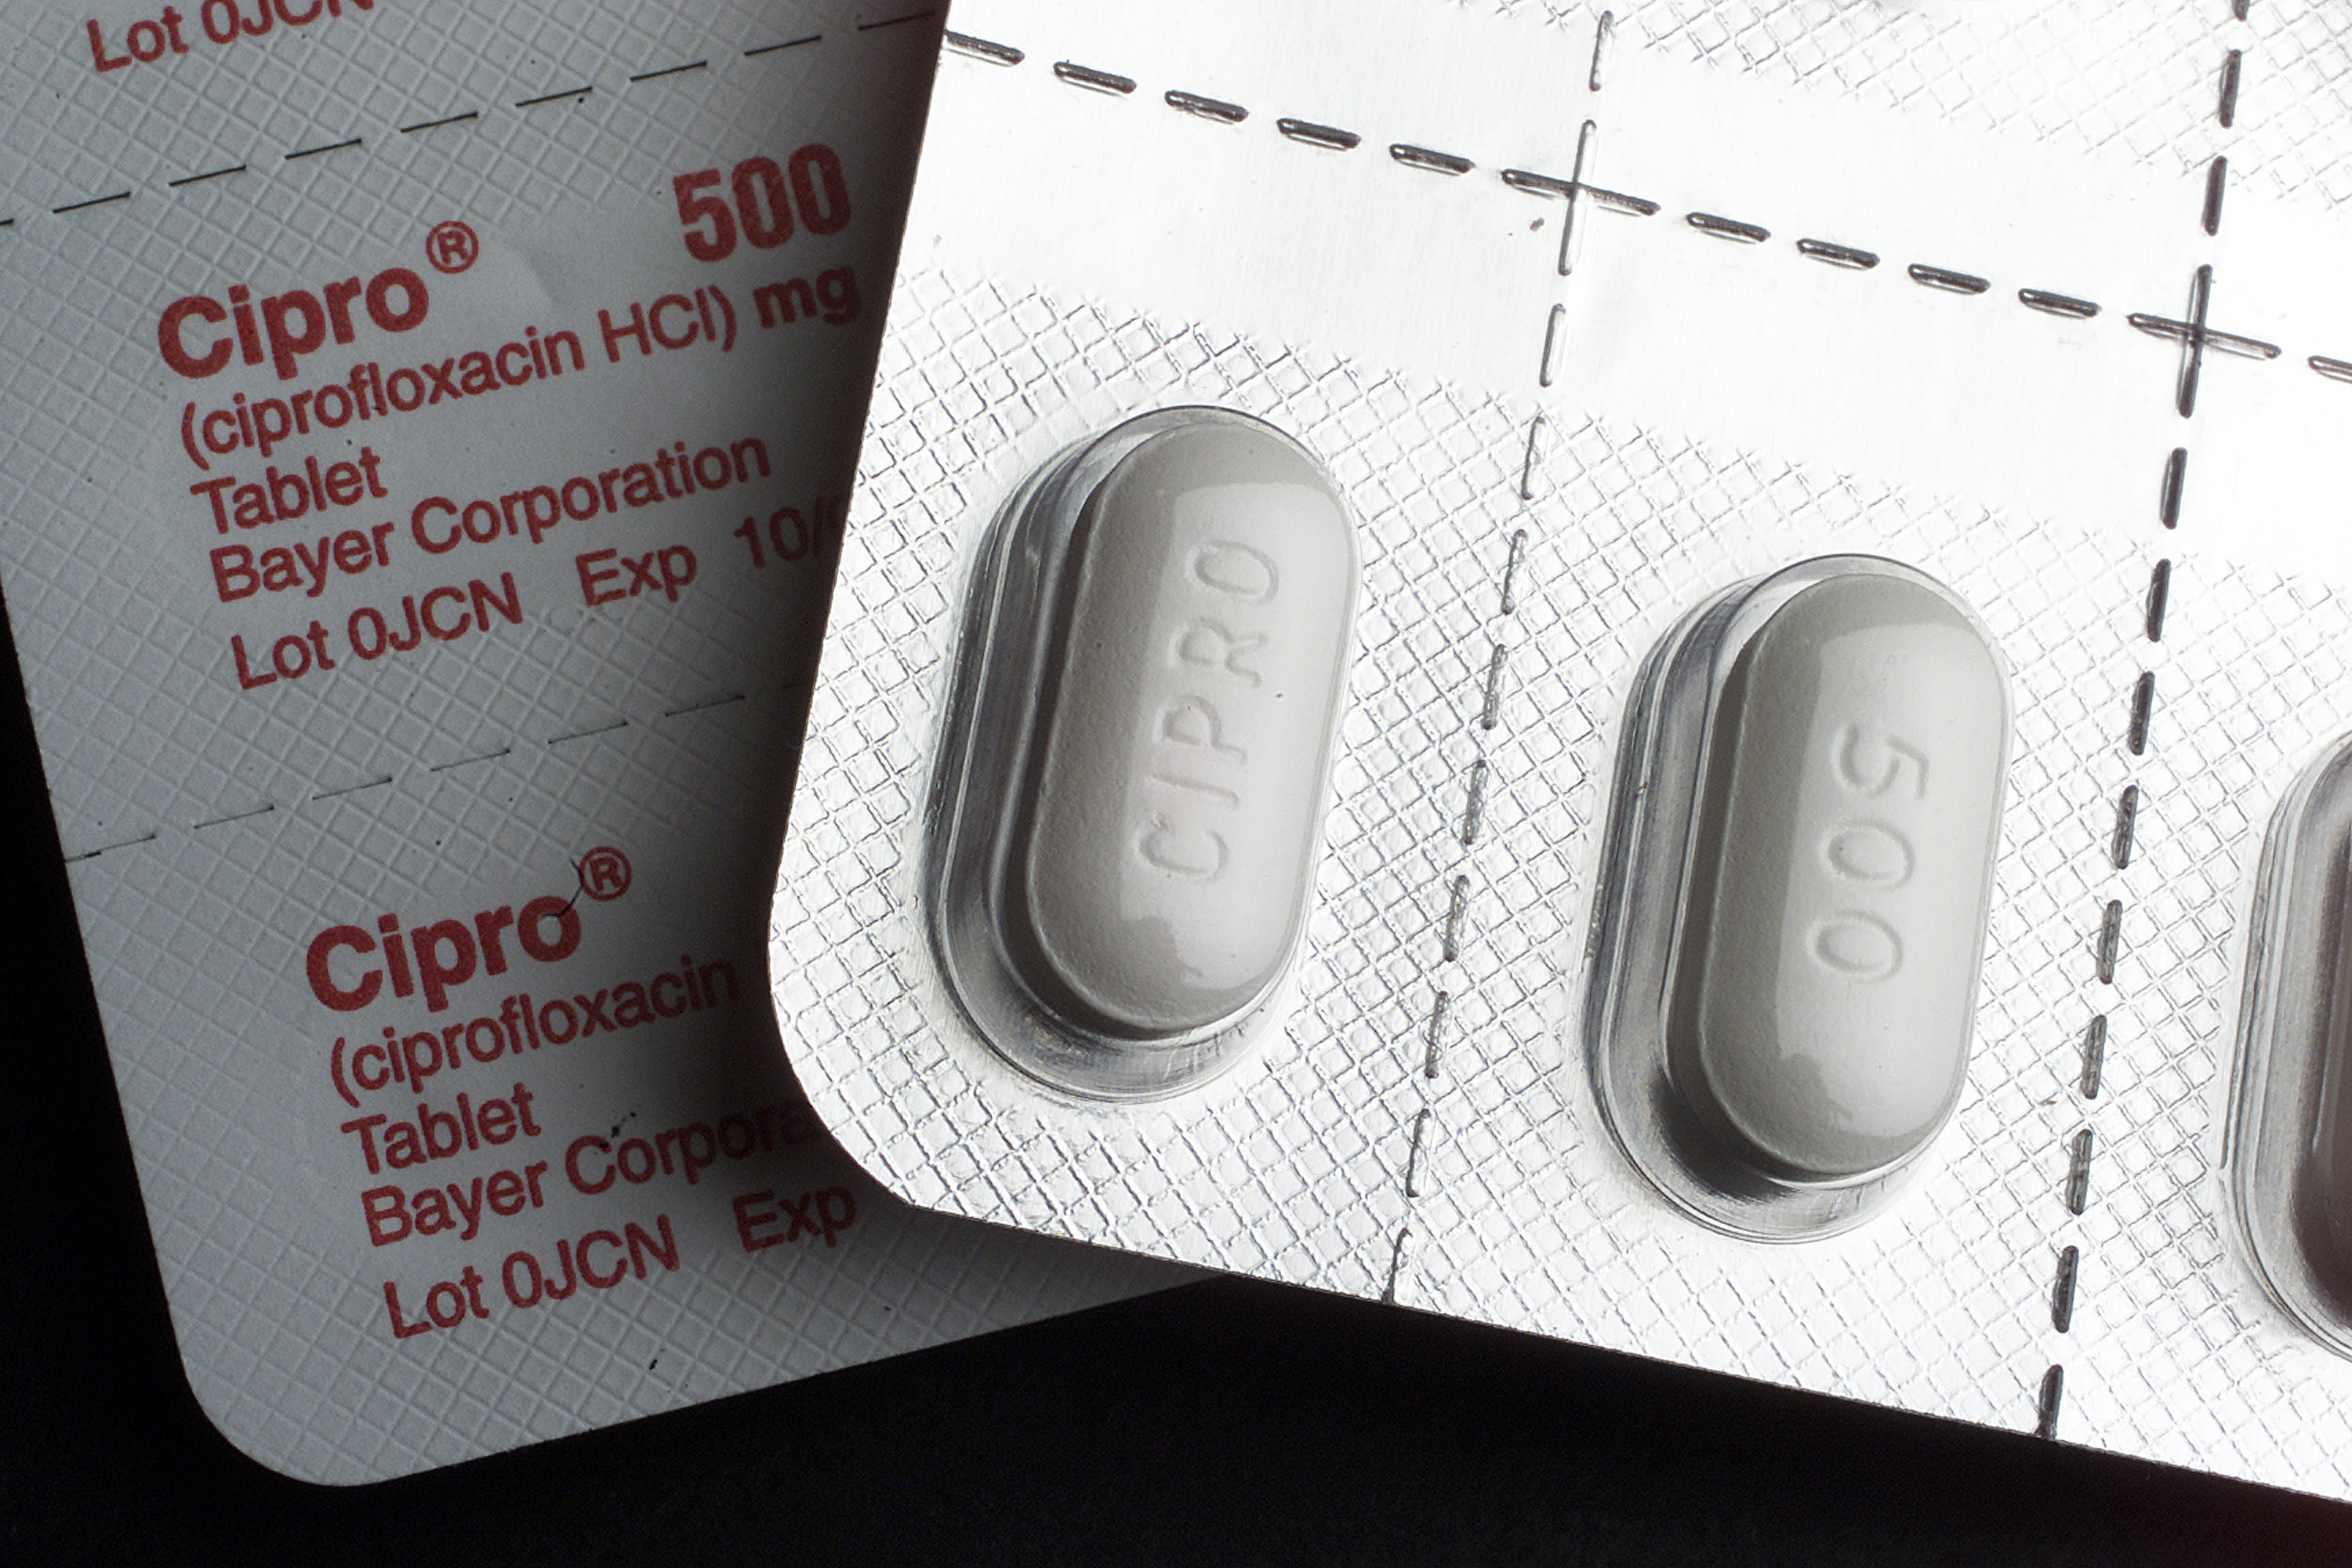 FDA strengthens safety warnings on Cipro, other antibiotics, due to